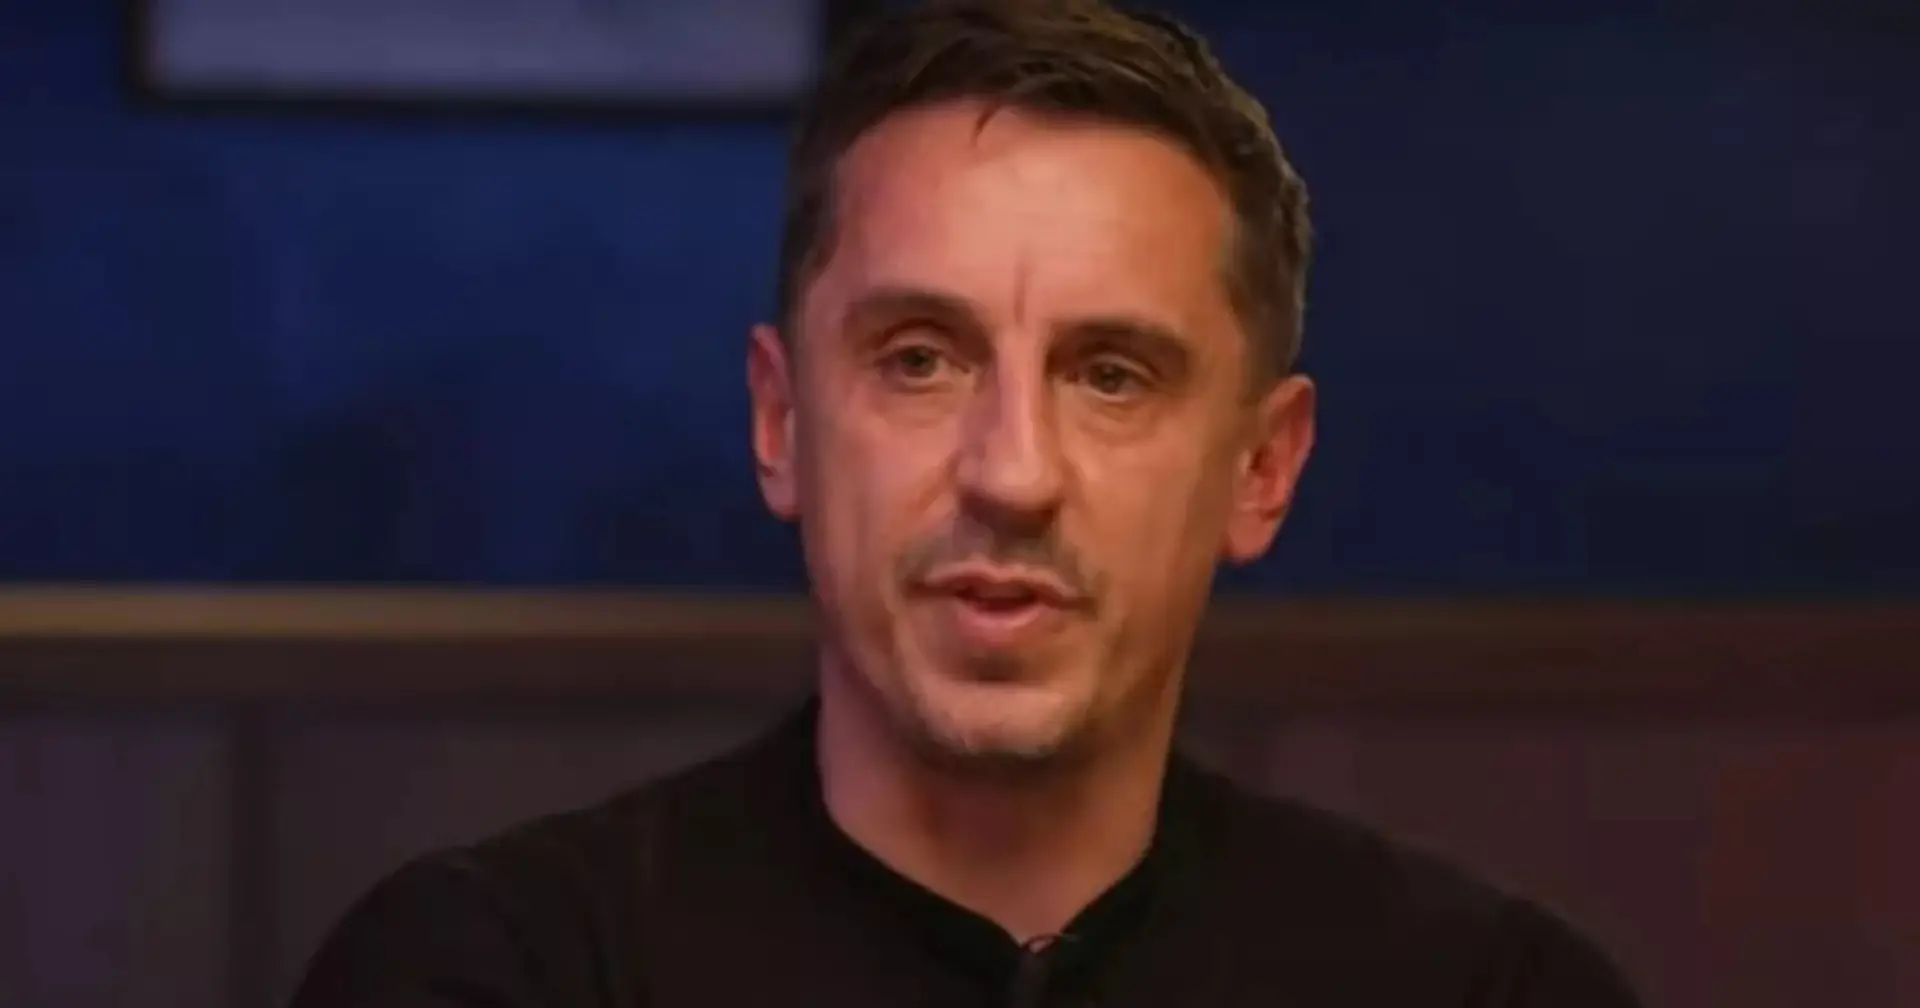 'This is just my feeling': Gary Neville expects Arsenal to drop points vs Man United